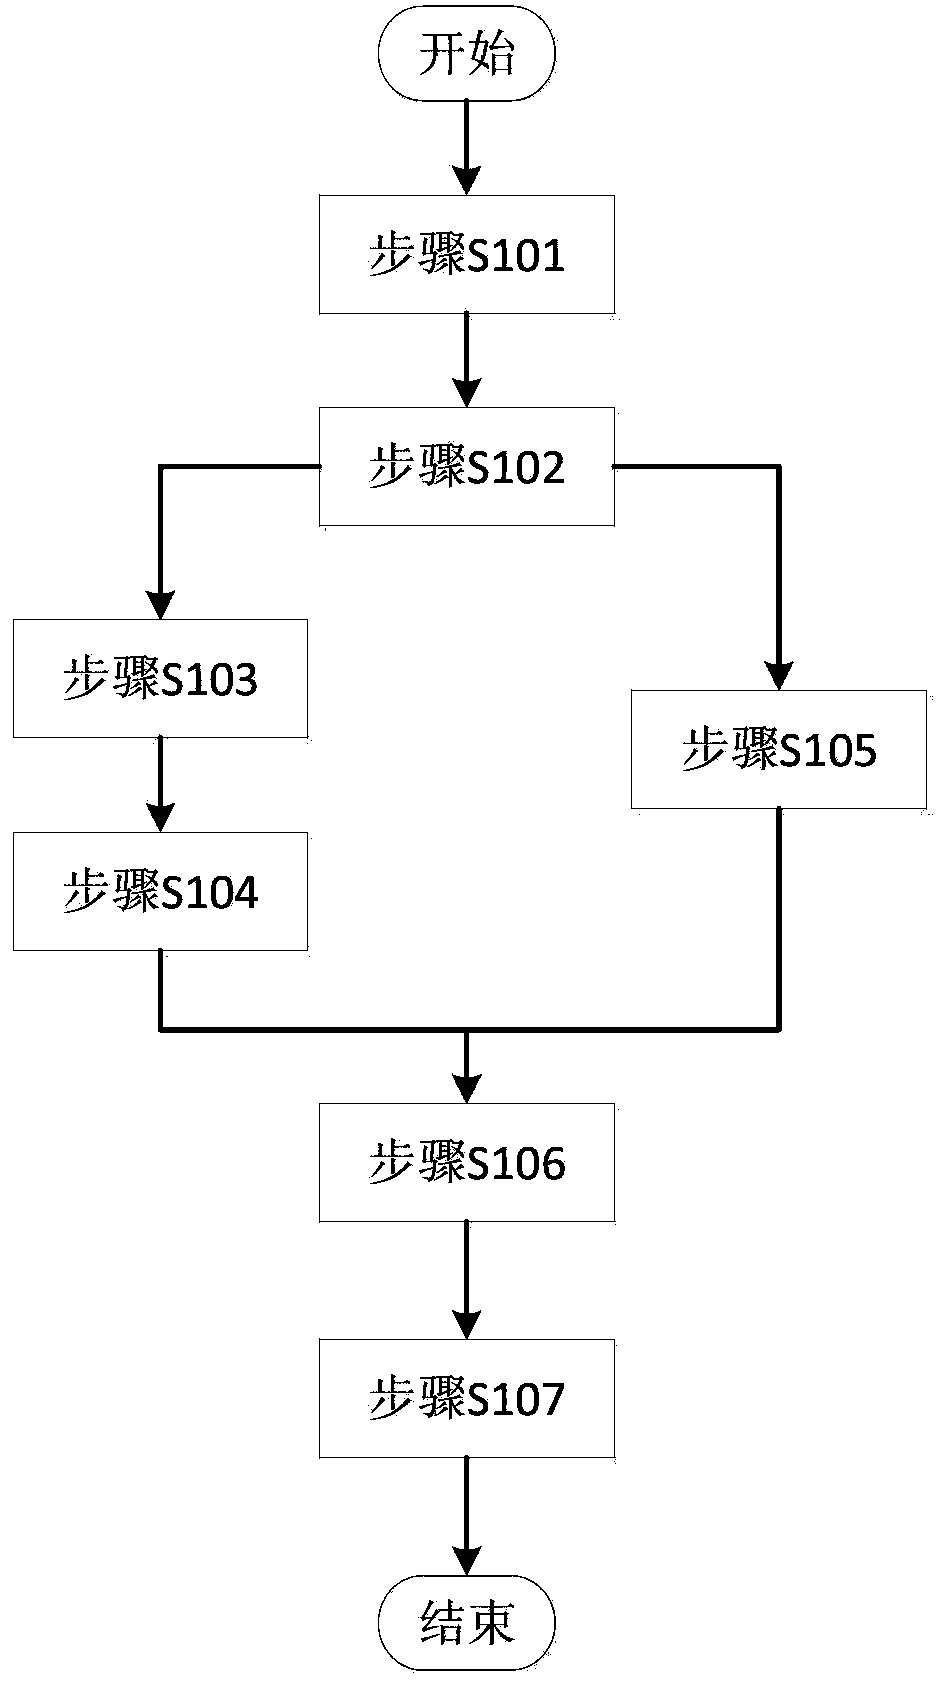 Method and system for automatic recommendation of optimal wind power generation set